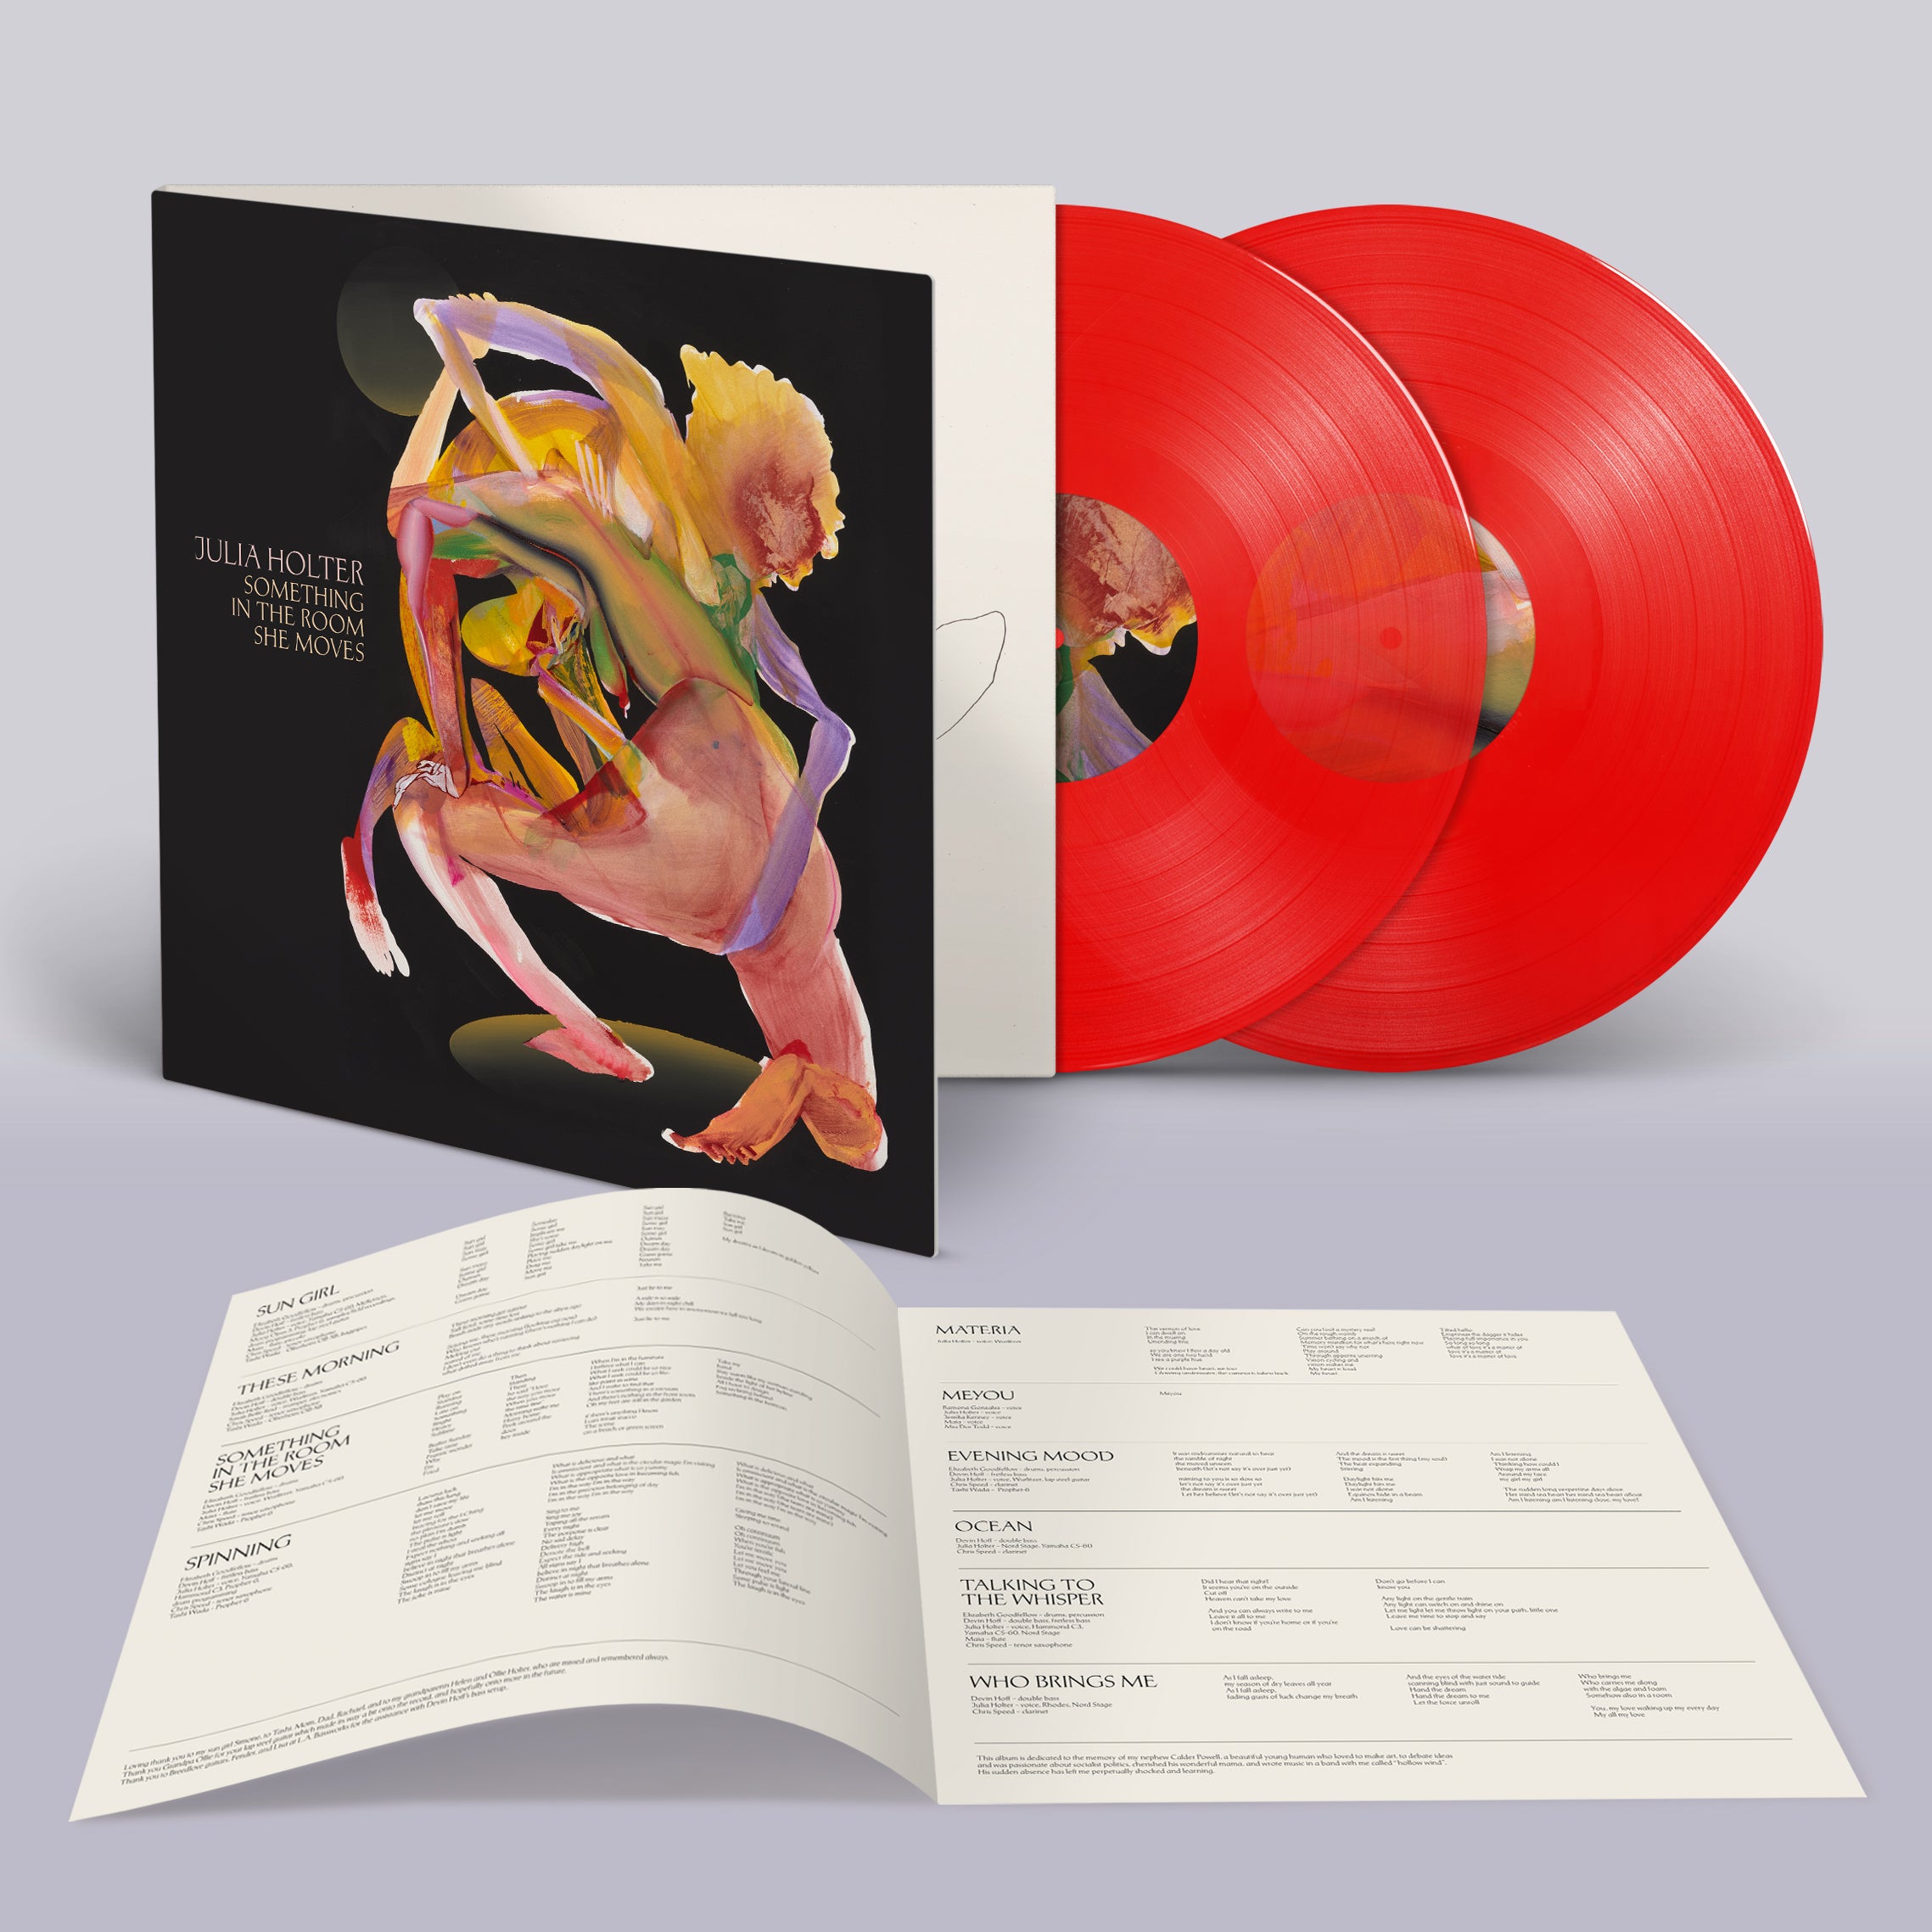 Julia Holter - Something in the Room She Moves: Limited Transparent Red Vinyl 2LP